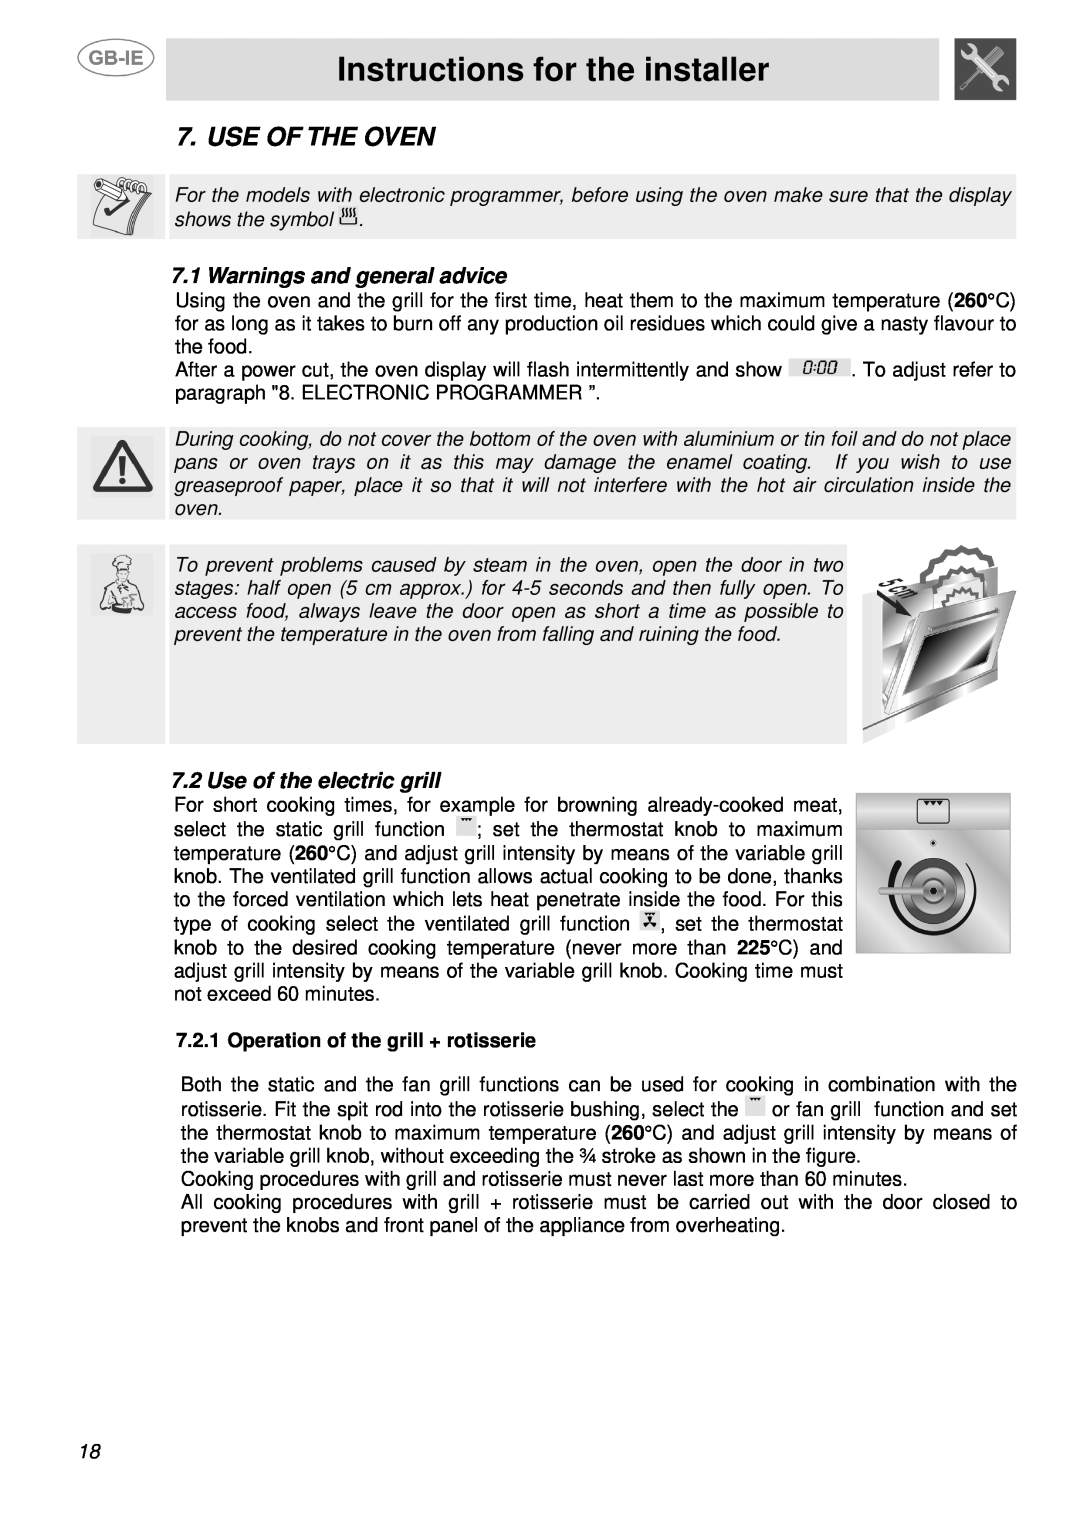 Smeg SSA91MFA Use Of The Oven, Warnings and general advice, Use of the electric grill, Instructions for the installer 